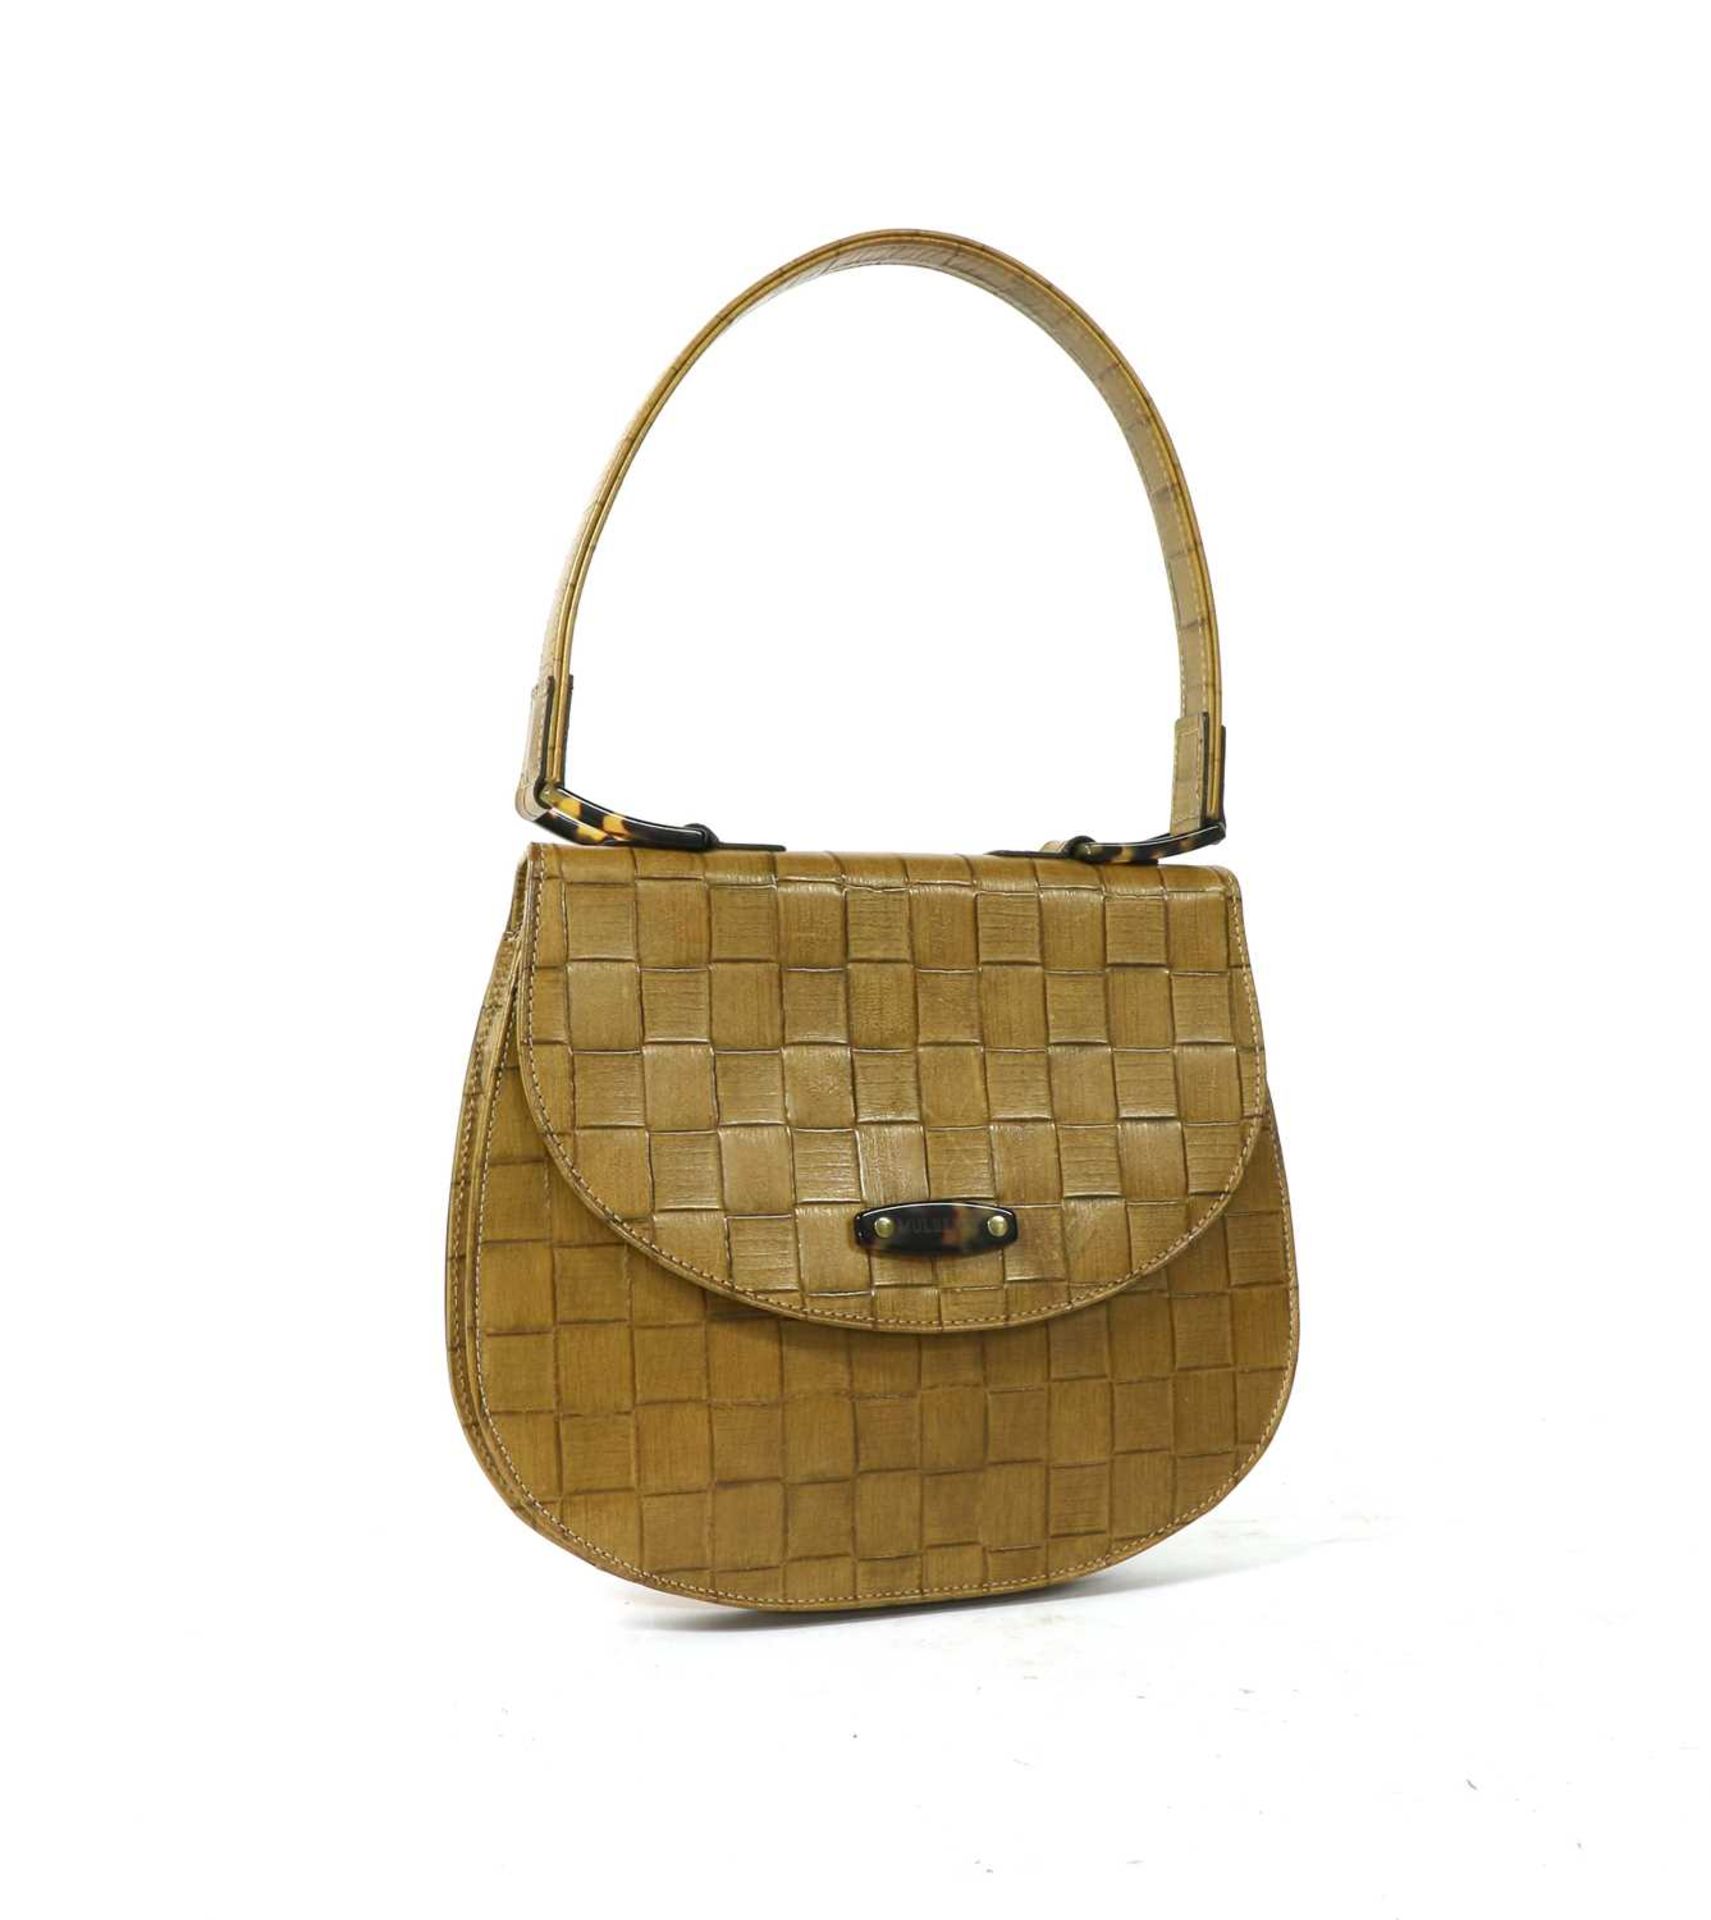 A vintage Roger Saul for Mulberry woven coated leather handbag